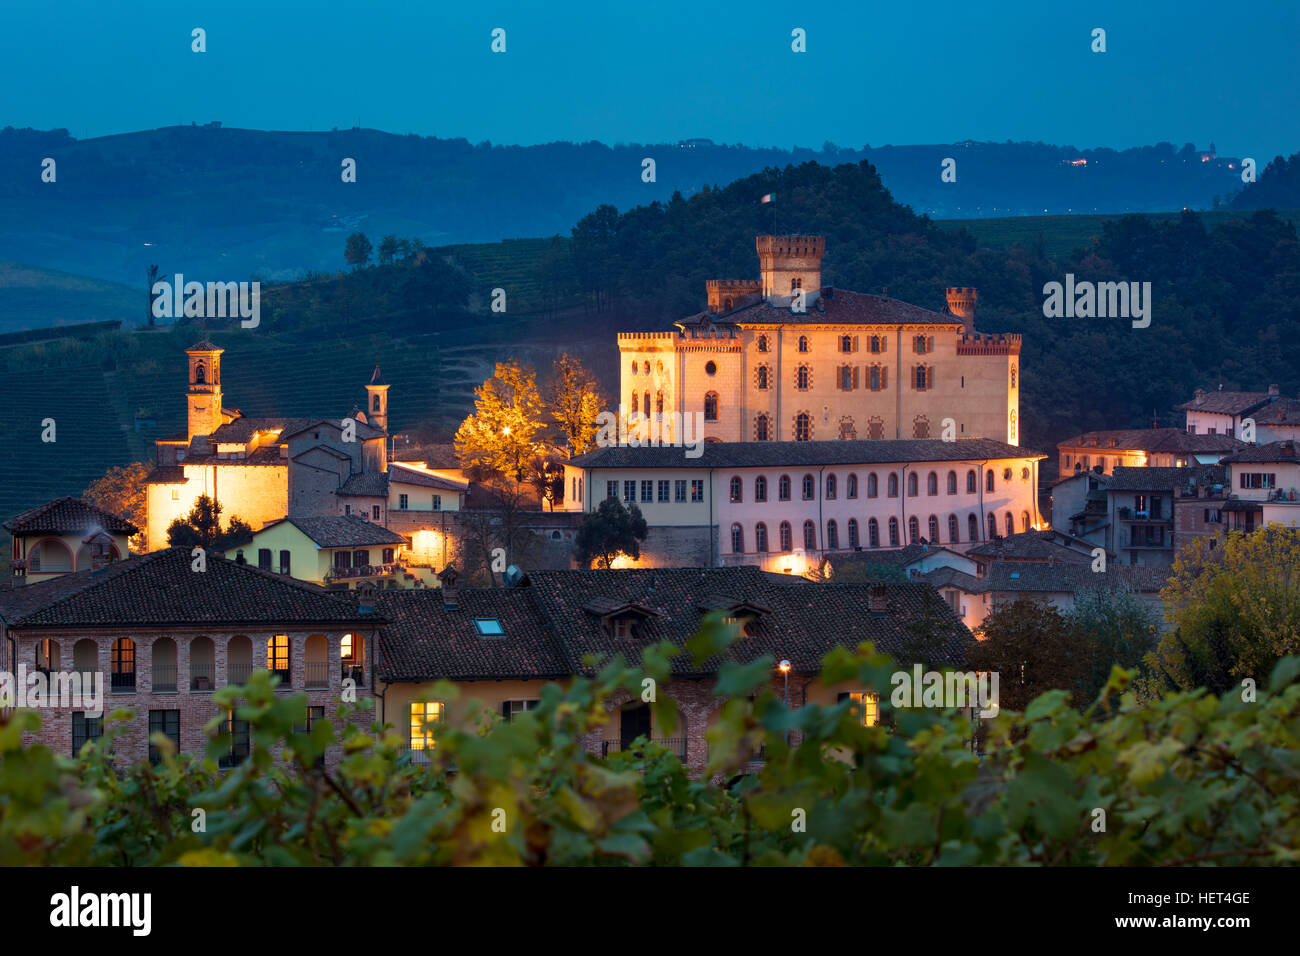 Twilight view of town of Barolo from inside a vineyard, Barolo, Piemonte, Italy Stock Photo